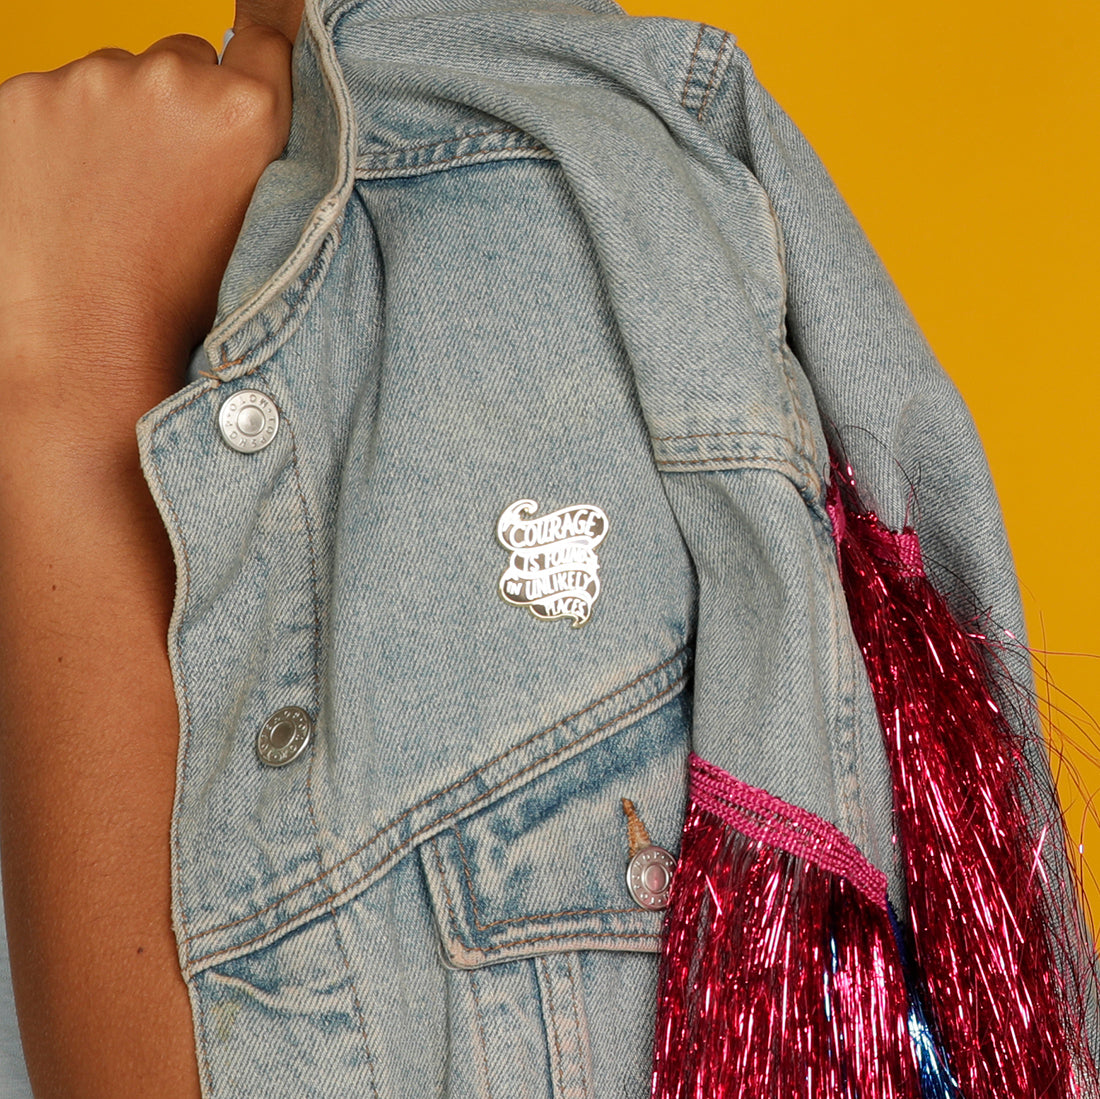 Courage is found in unlikely places enamel pin on a denim jacket